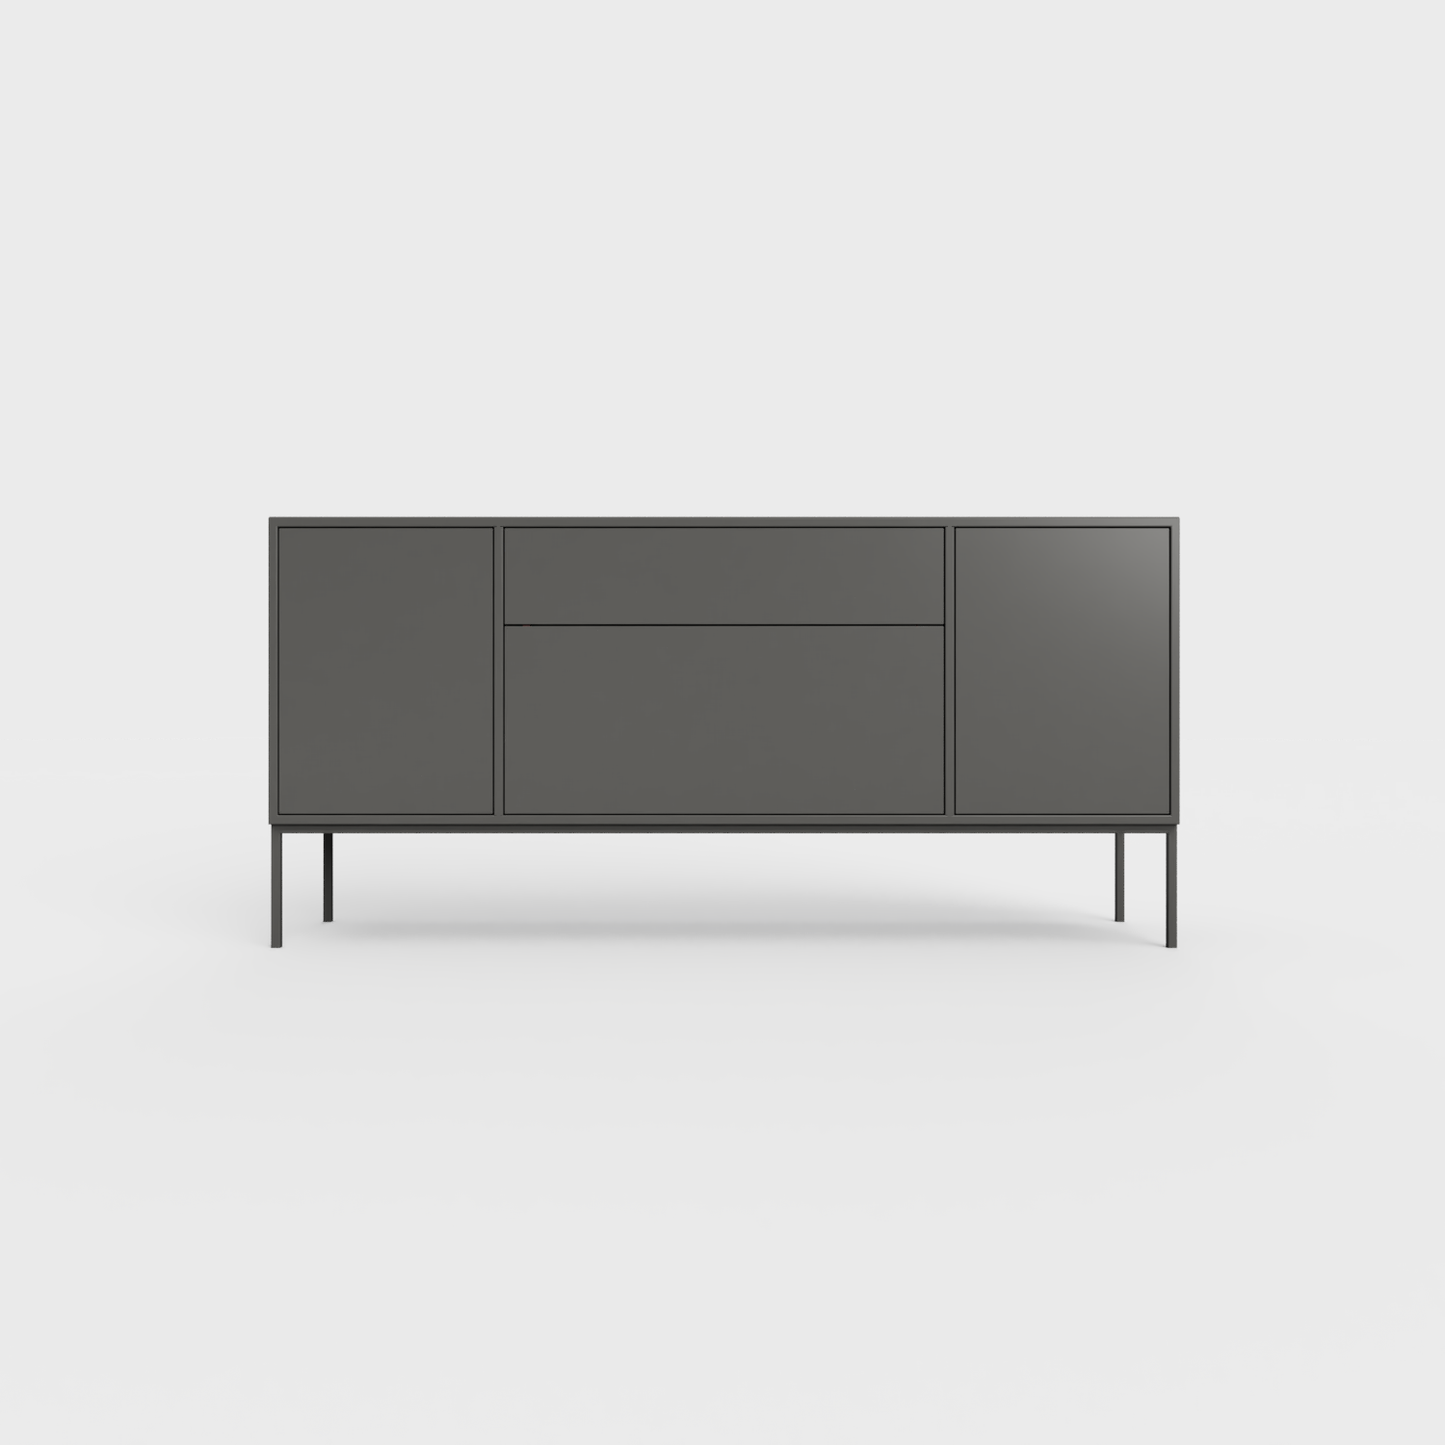 Arnika 02 Sideboard in Anthracite color, powder-coated steel, elegant and modern piece of furniture for your living room